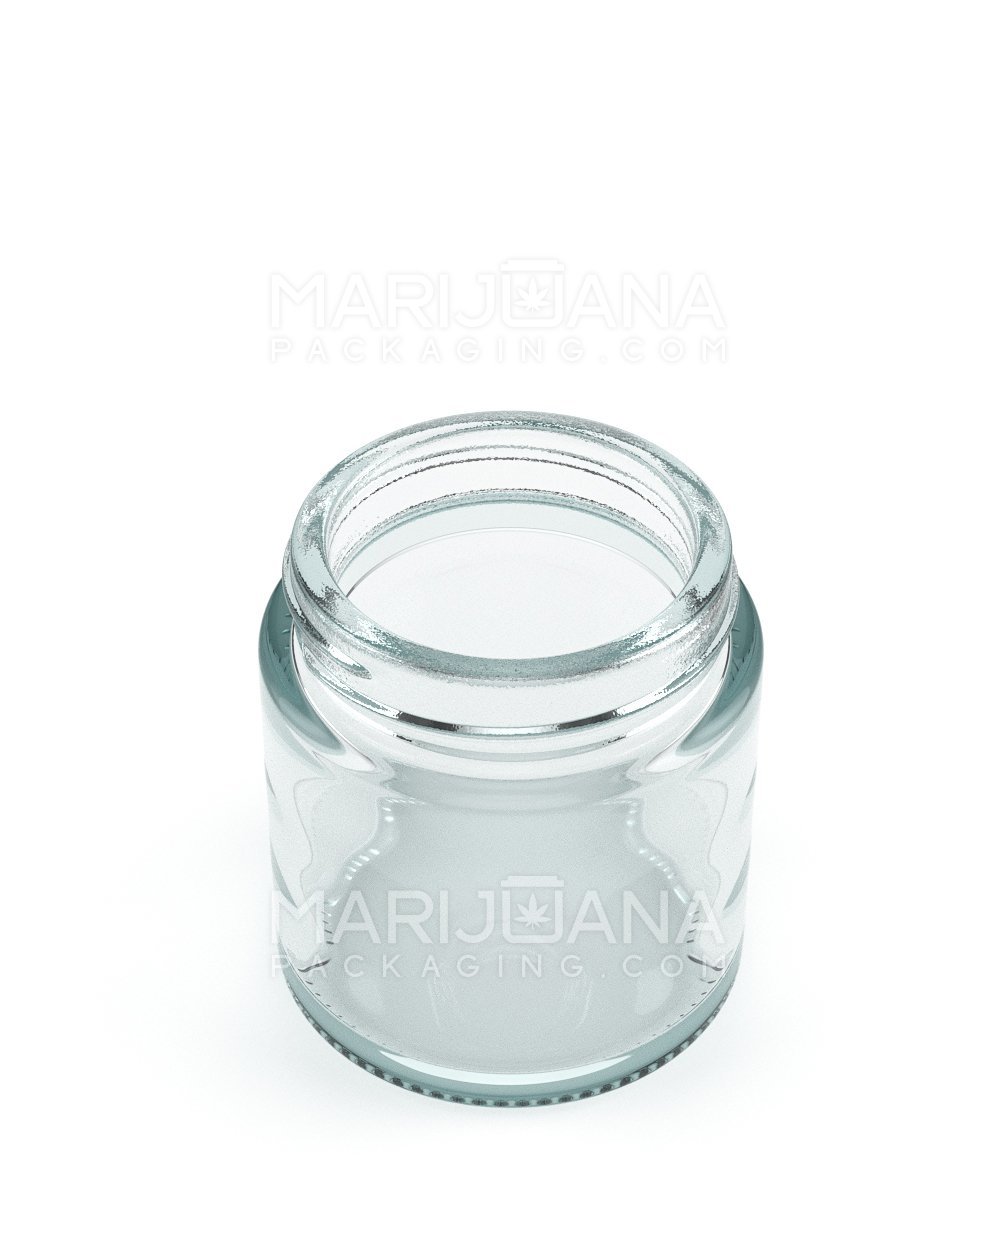 Straight Sided Clear Glass Jars | 53mm - 3oz - 150 Count - 2